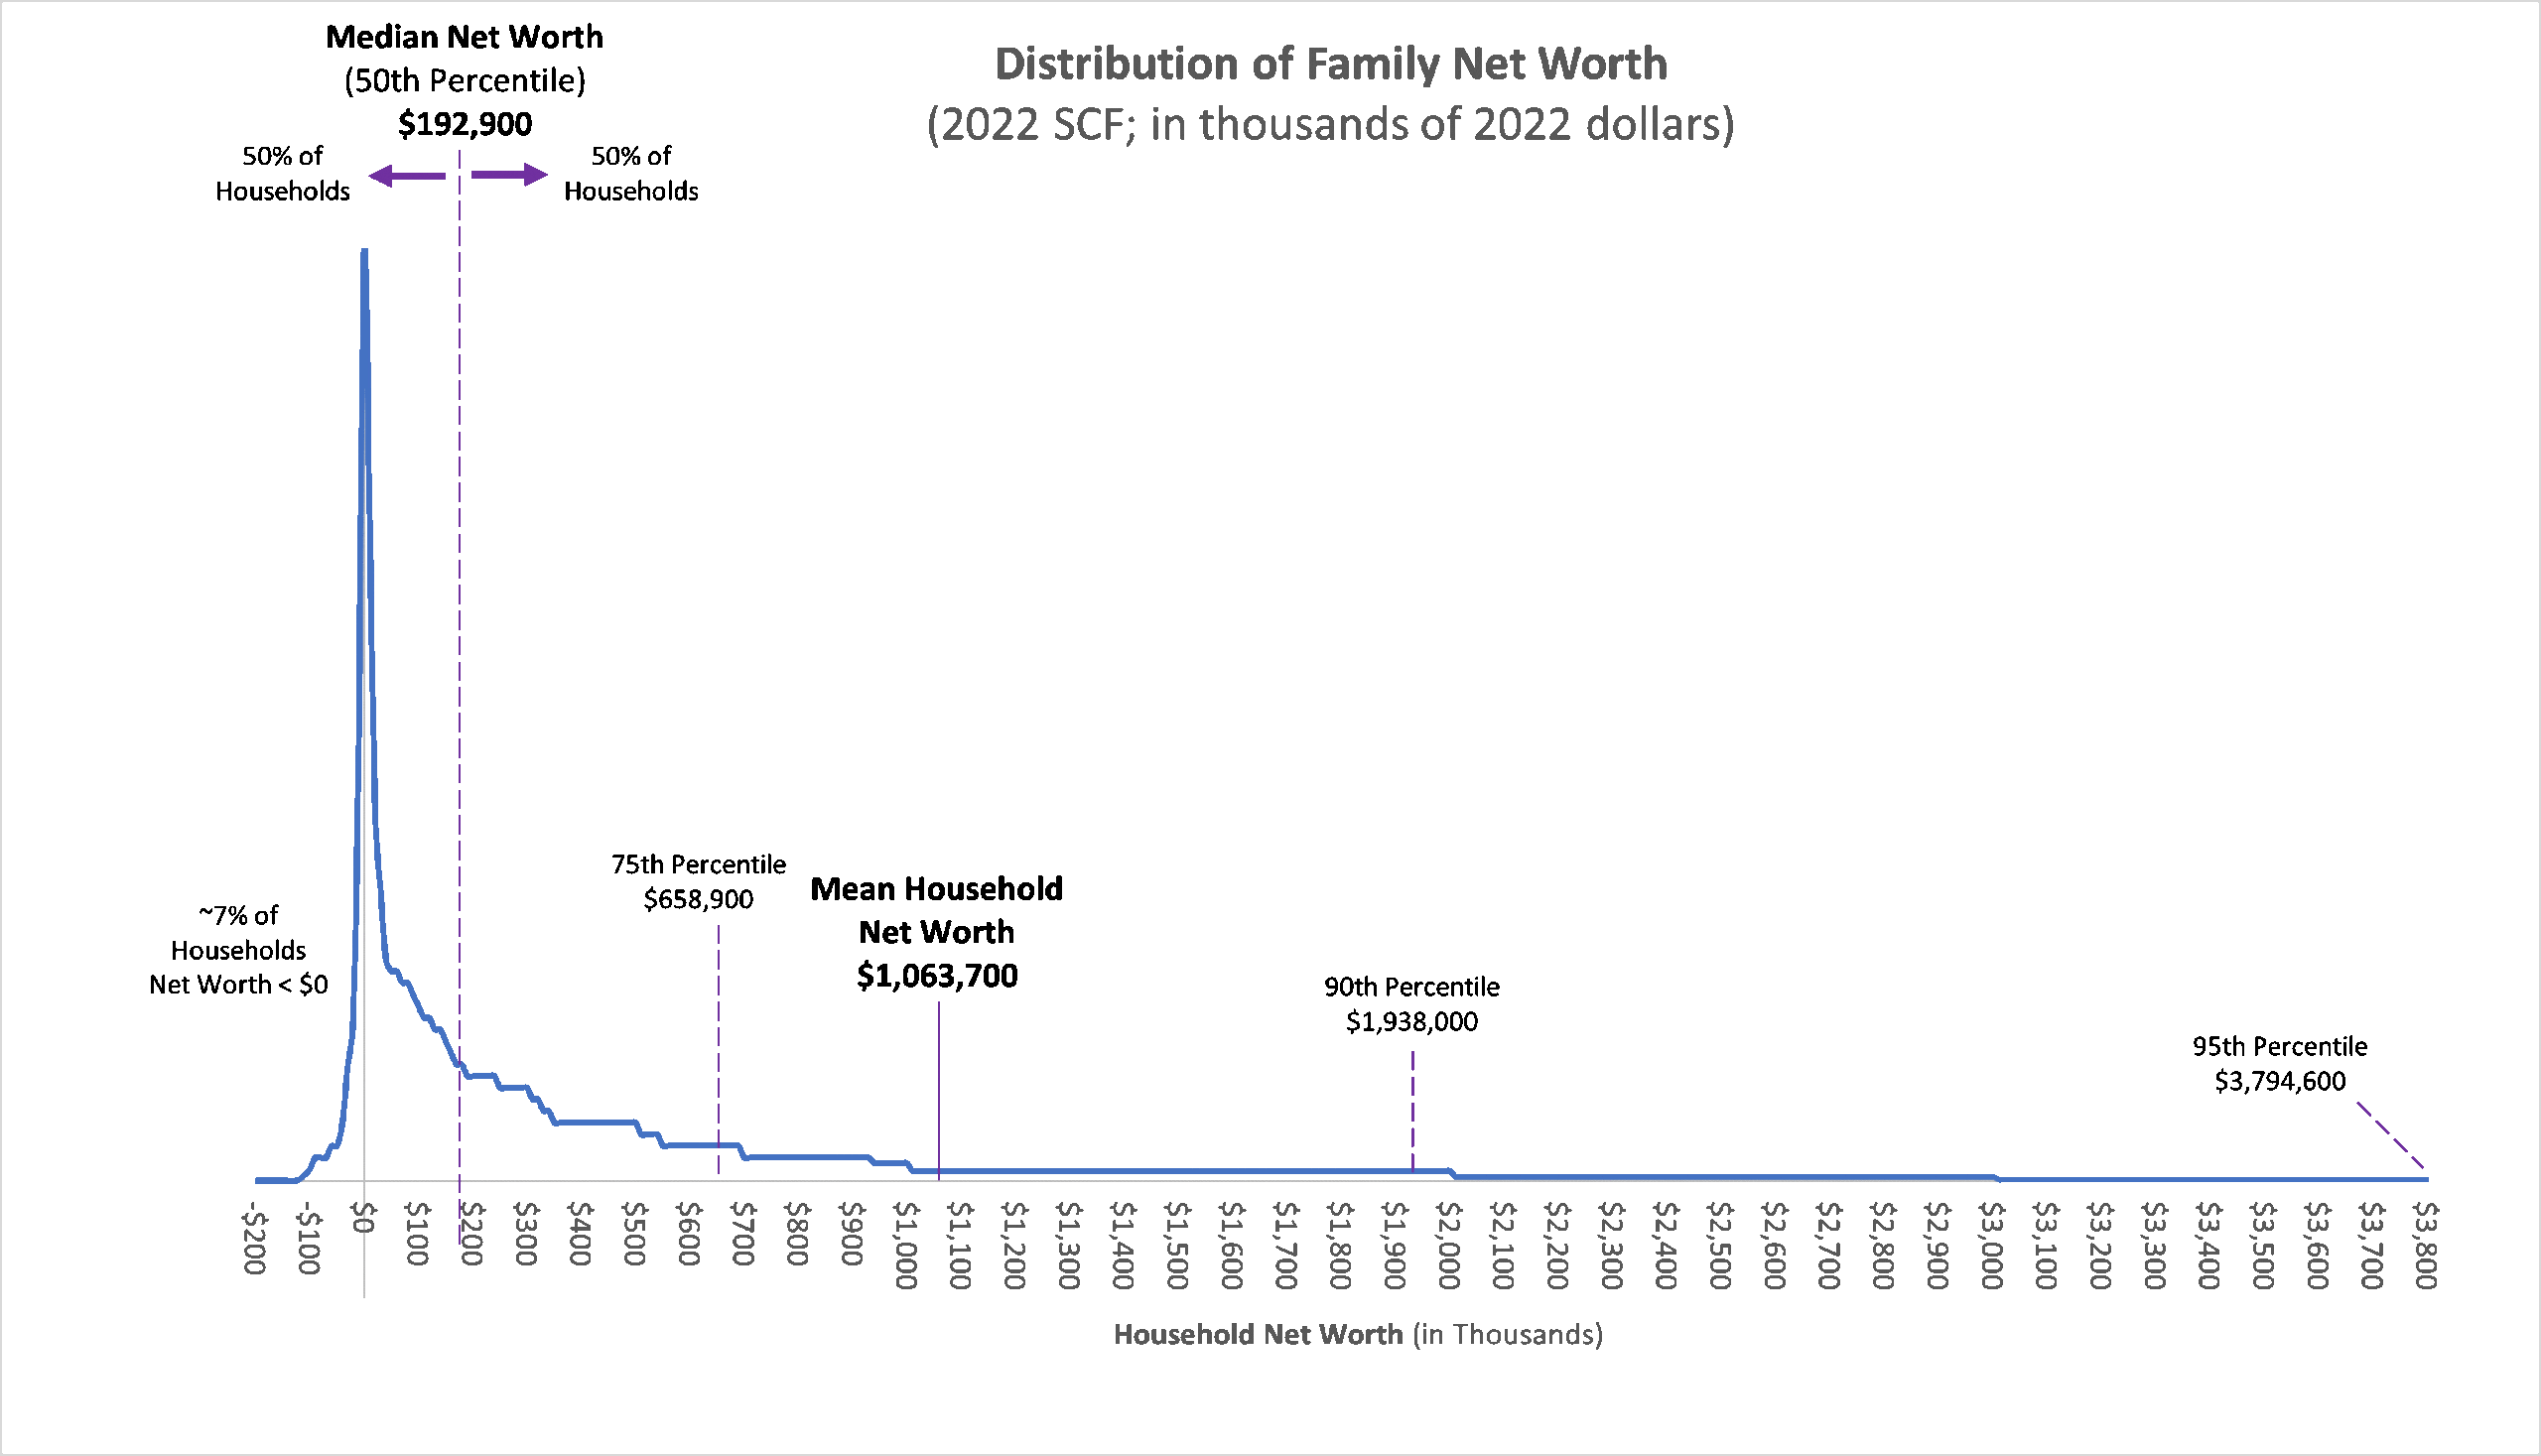 Distribution of household net worth in U.S. as of 2022